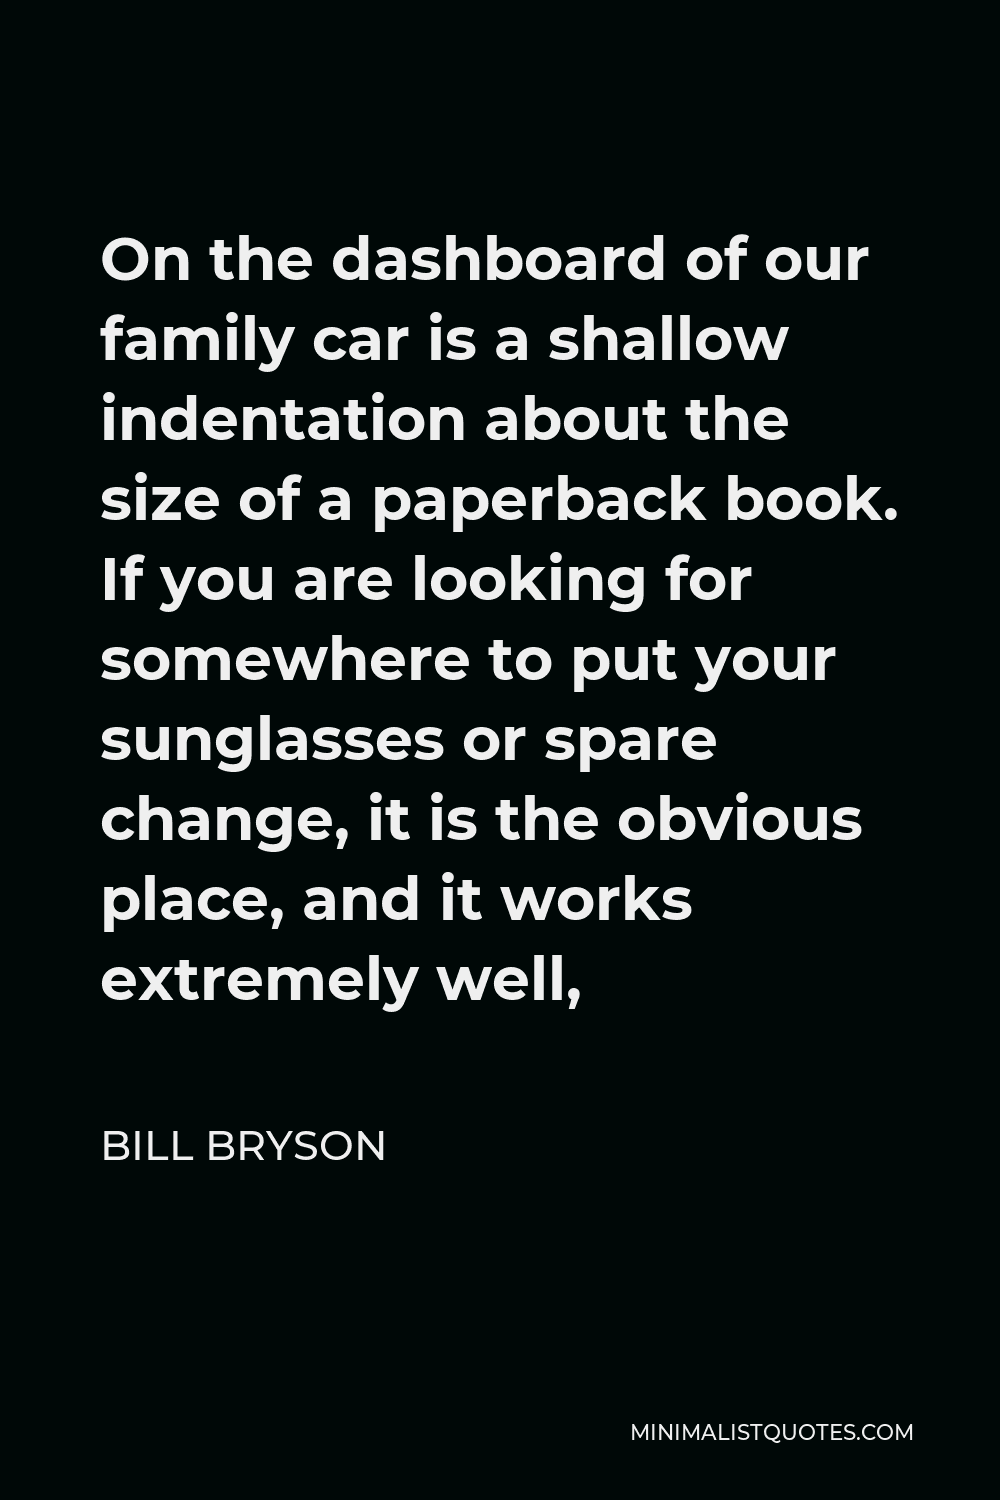 Bill Bryson Quote - On the dashboard of our family car is a shallow indentation about the size of a paperback book. If you are looking for somewhere to put your sunglasses or spare change, it is the obvious place, and it works extremely well,